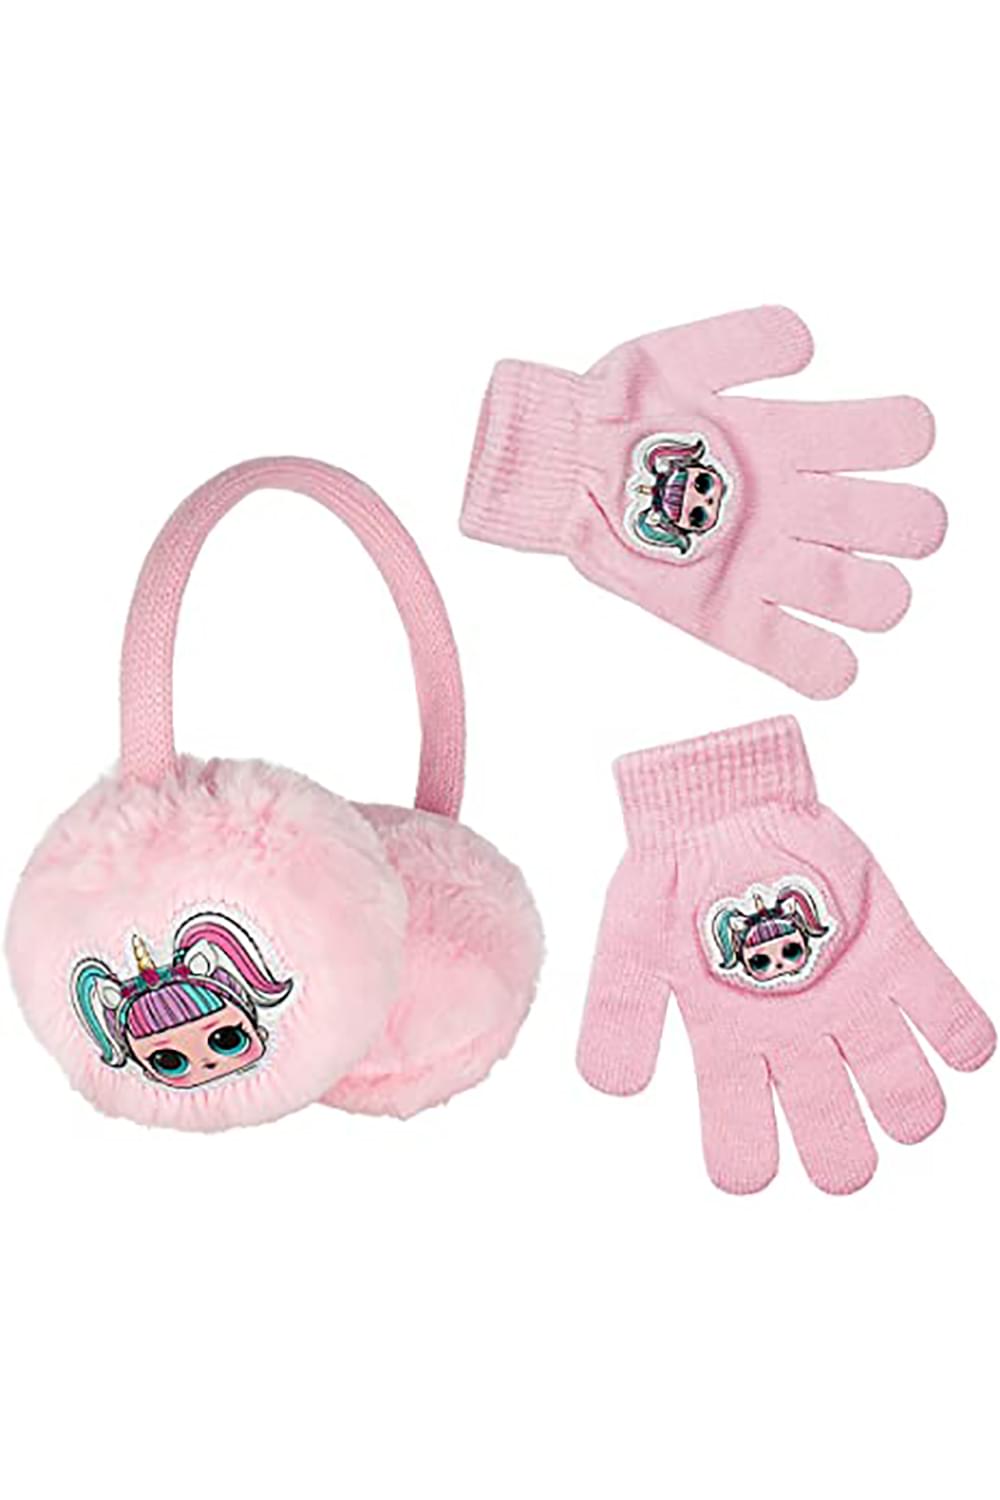 LOL Surprise Pink Earmuff and Glove Set